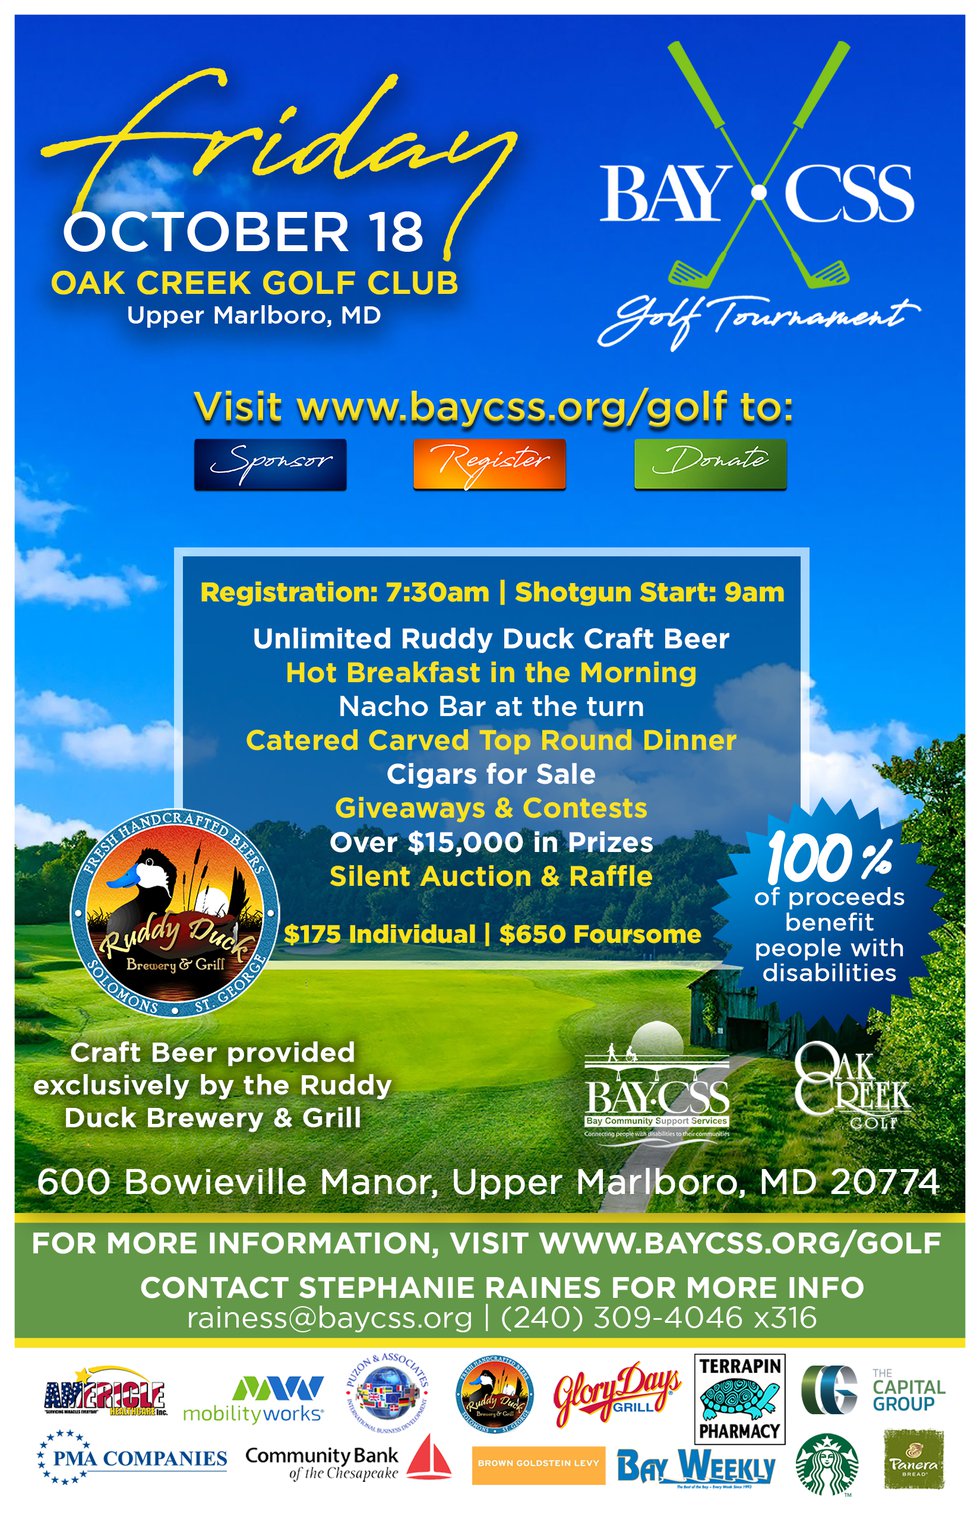 2019 General Golf Flyer with sposnors half page 8.29.19.jpg